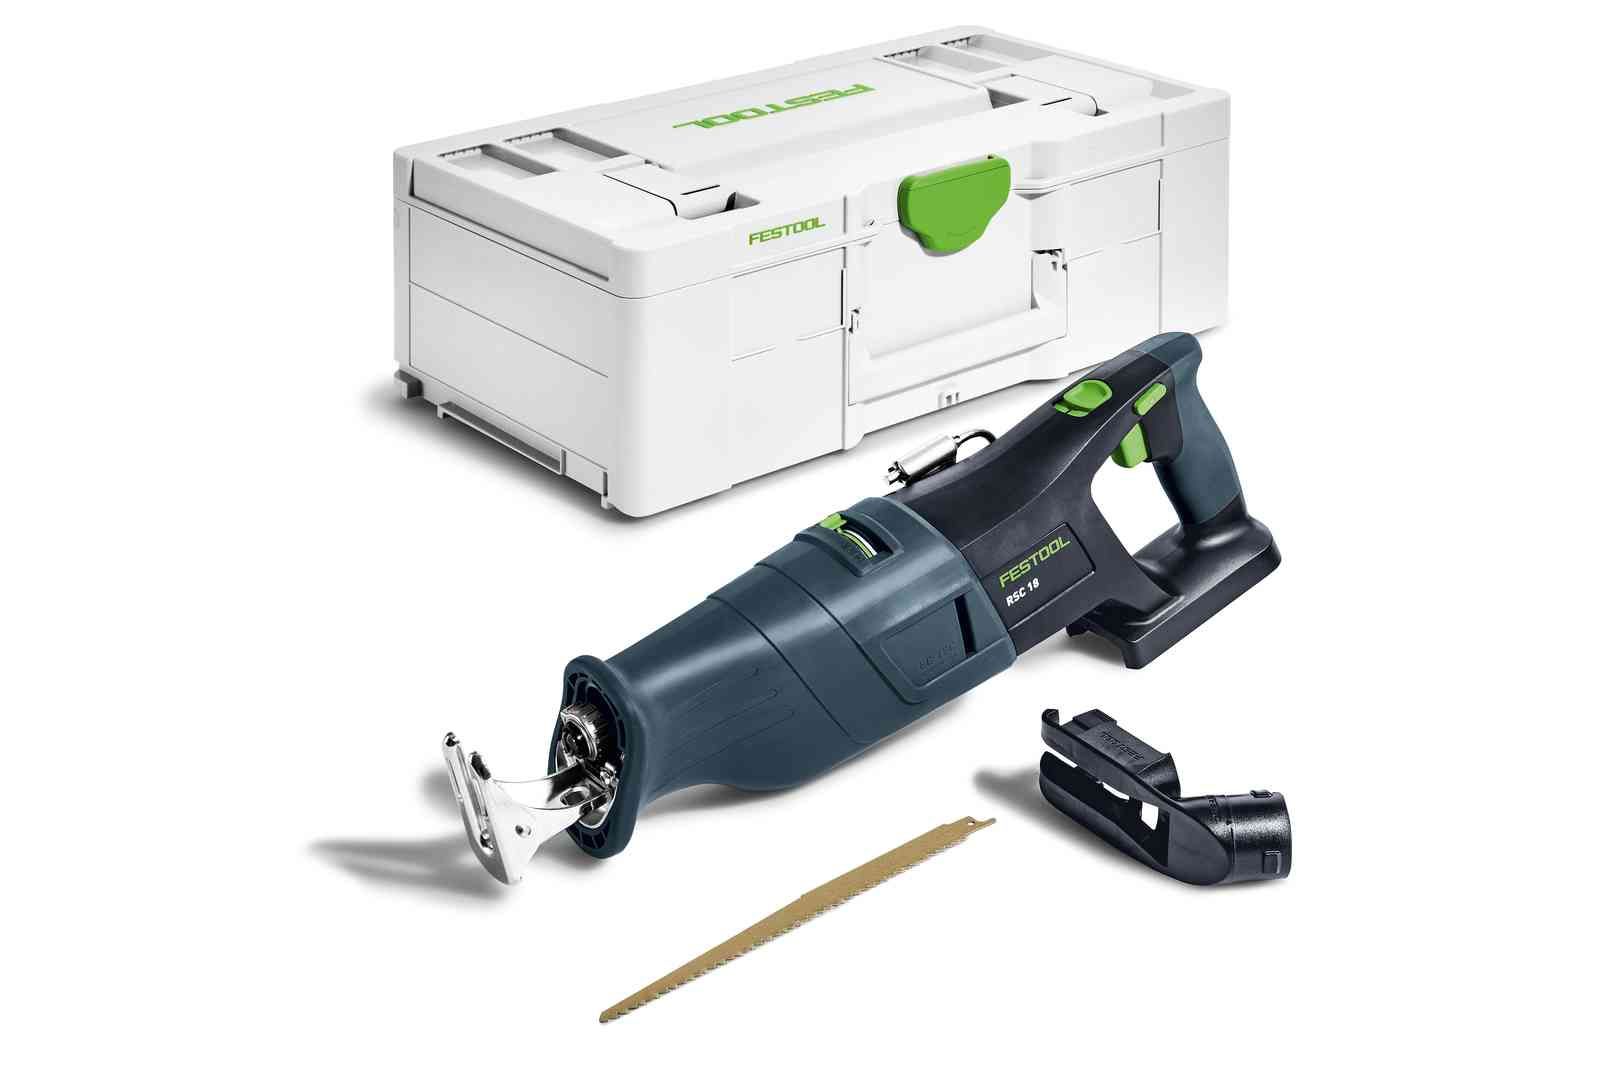 RSC 18 18V Cordless Reciprocating Saw Basic in Systainer Bare (Tool Only) 576947 by Festool